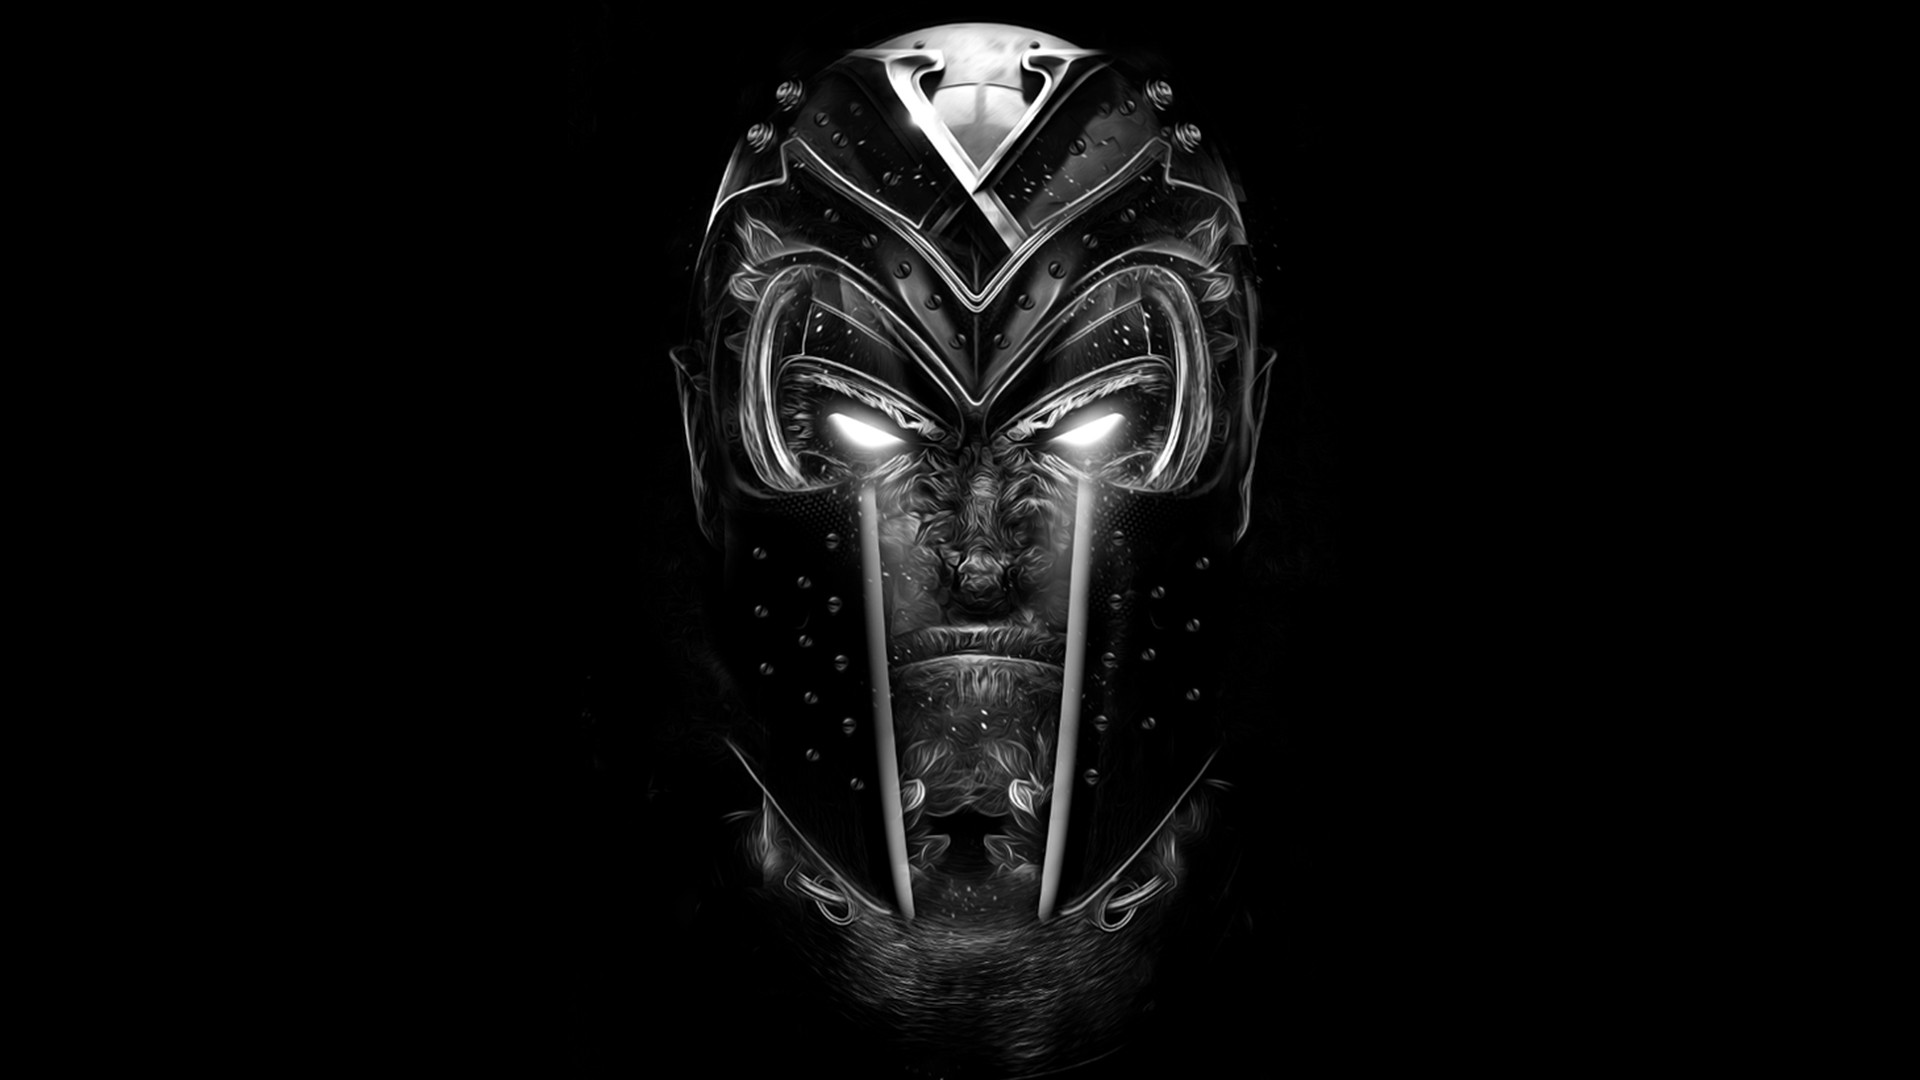 Wallpaper Black And White Mago Helmet Face Glowing Eyes X